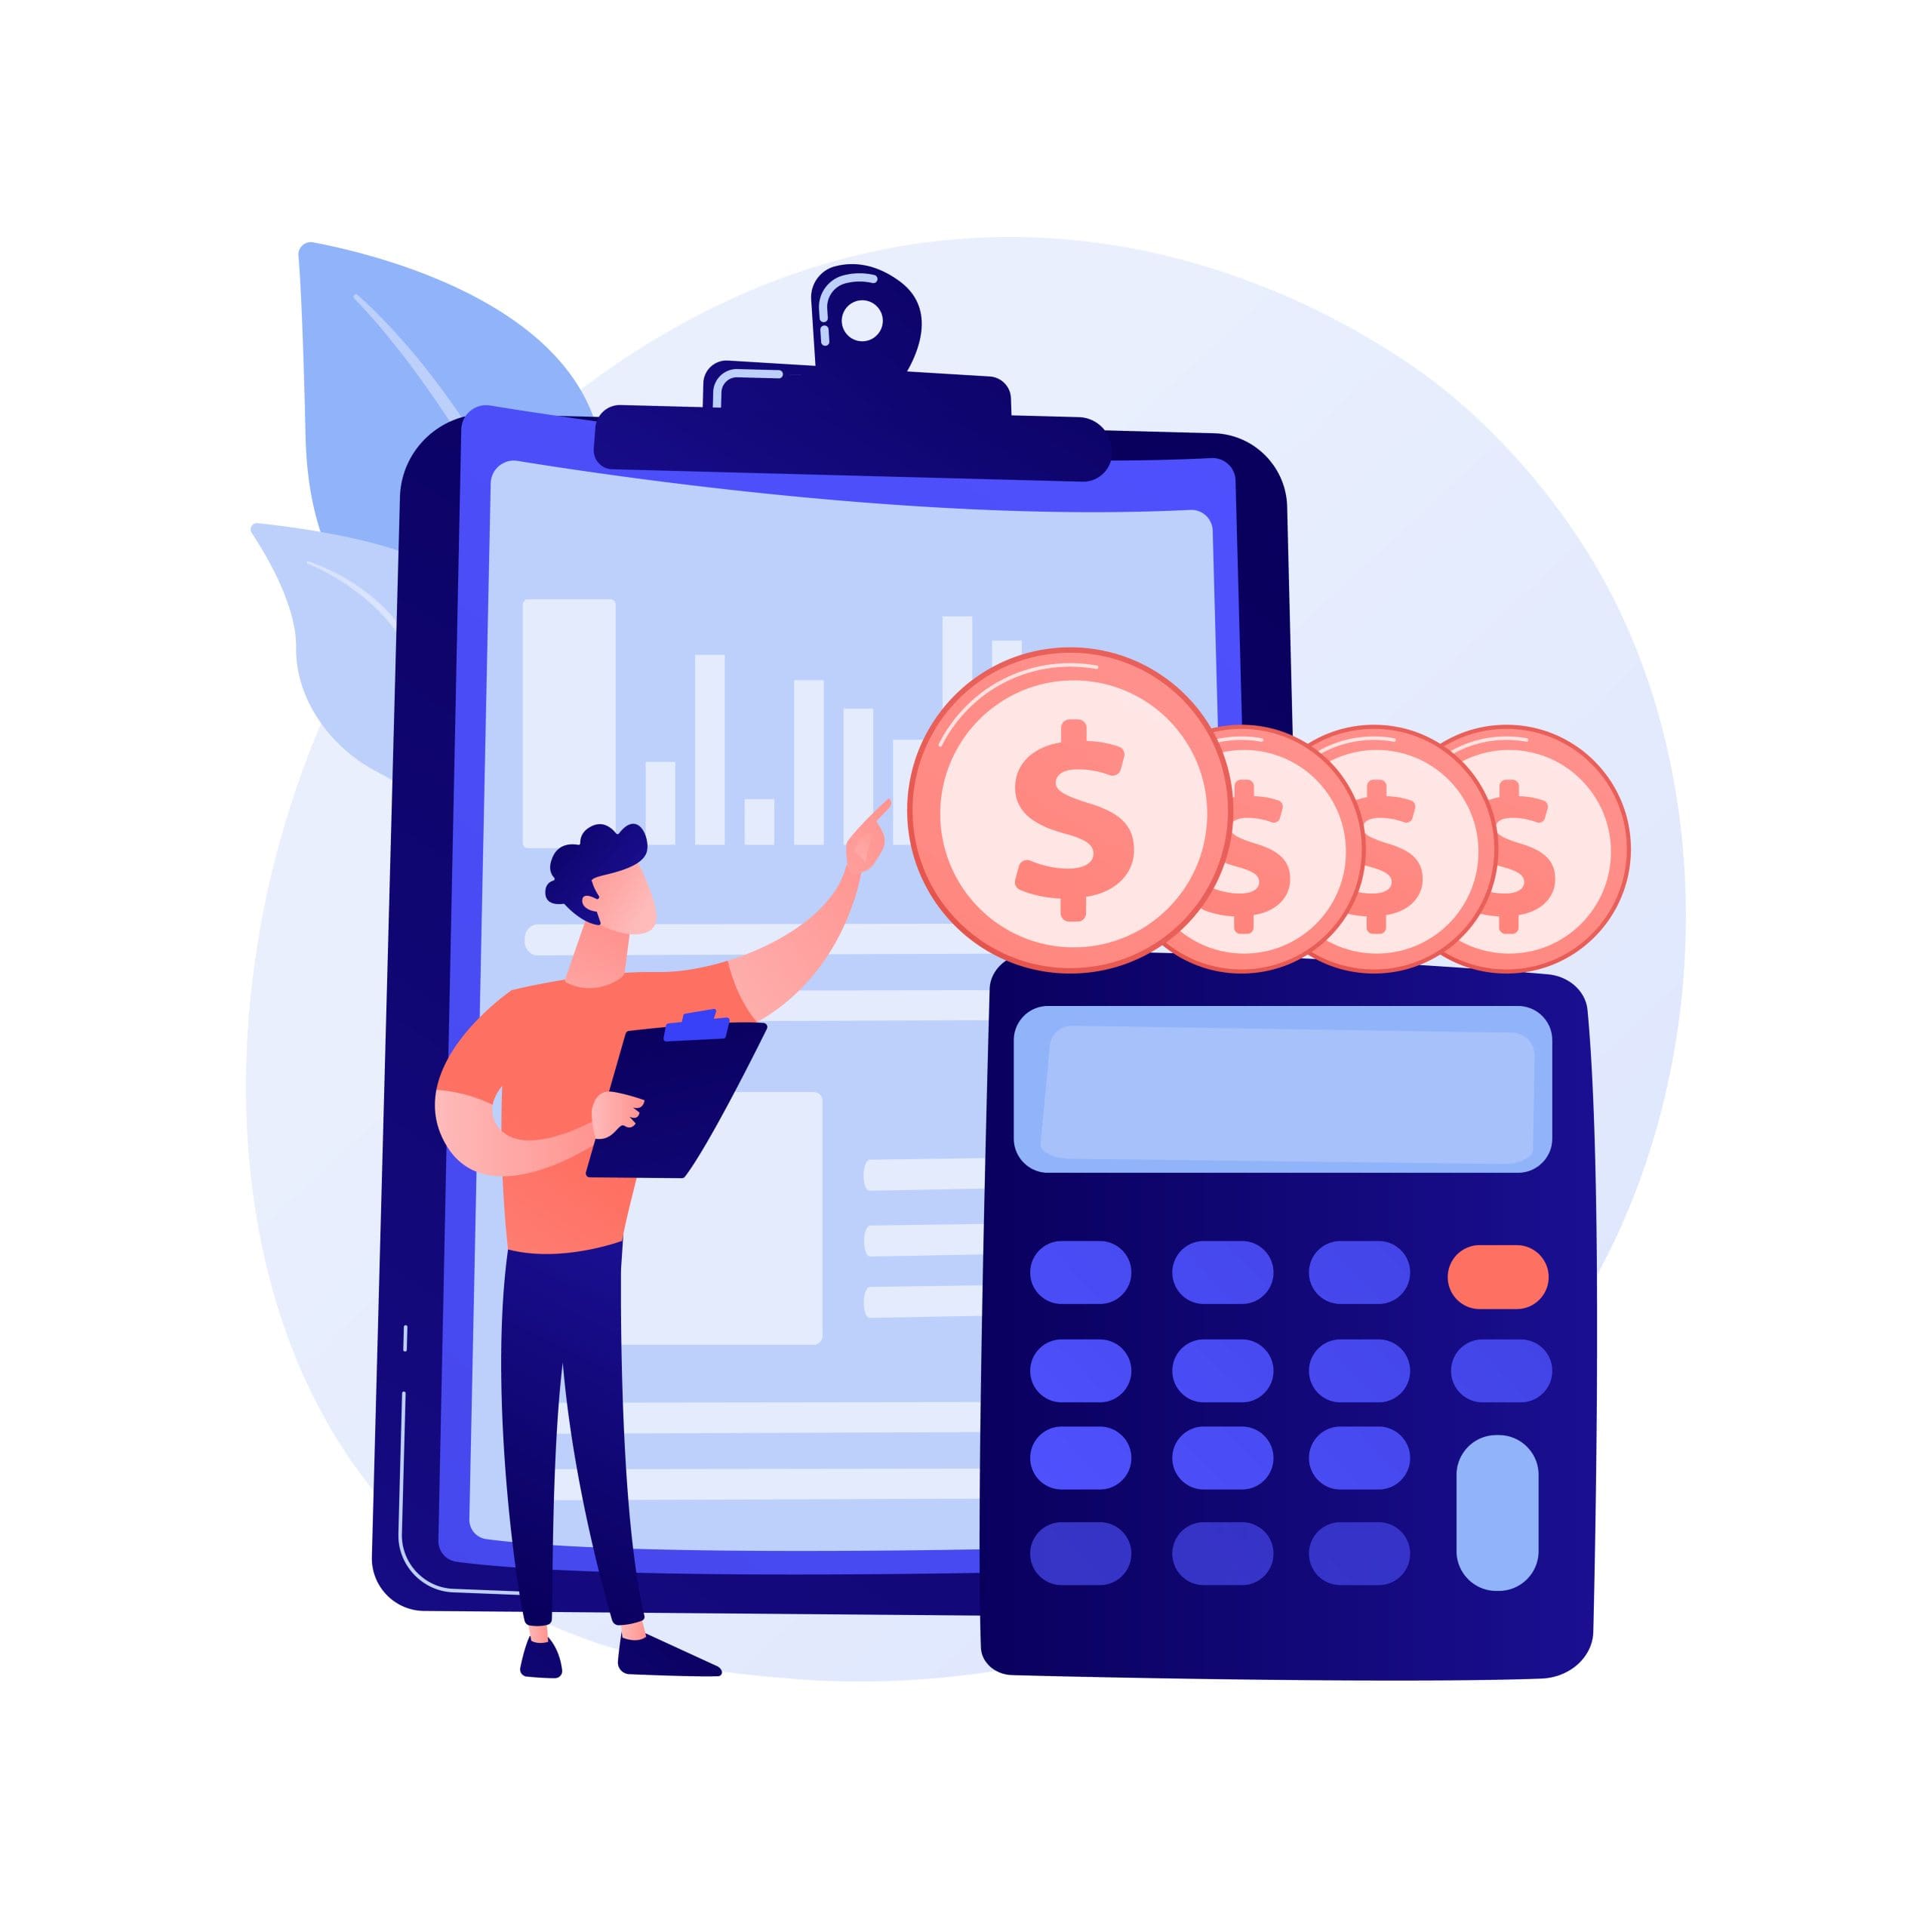 Balance sheet cartoon web icon. Accounting process, finance analyst, calculating tools. Financial consulting idea. Bookkeeping service. Vector isolated concept metaphor illustration